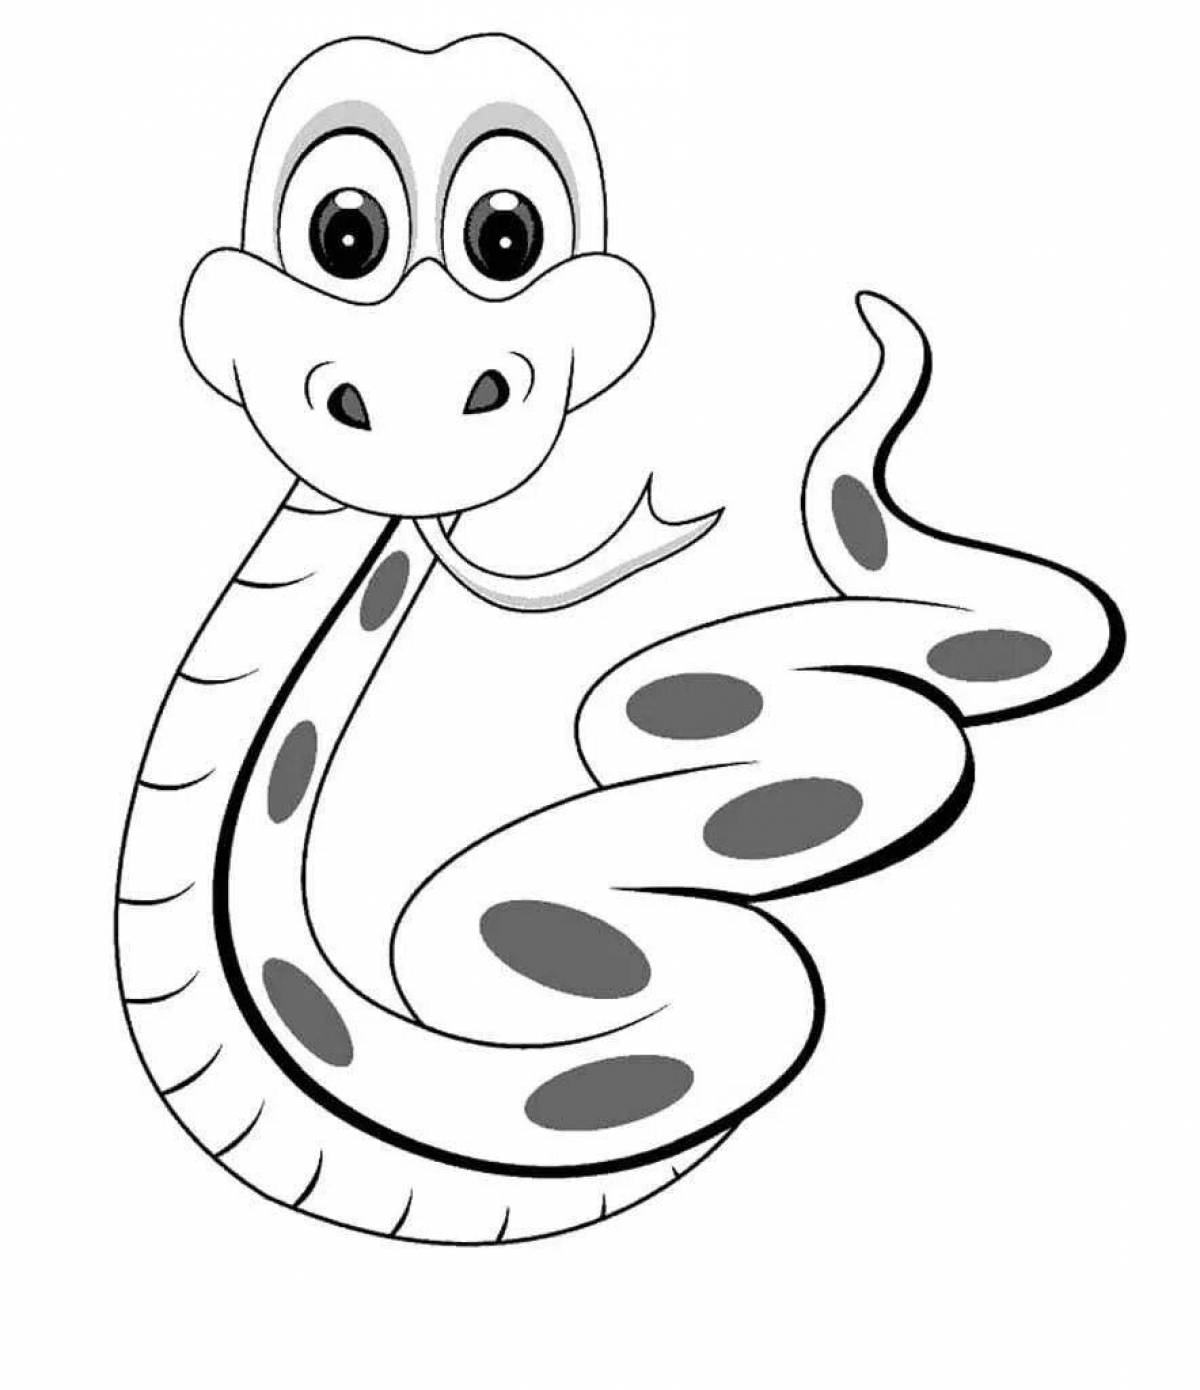 Playful snake coloring page for 5-6 year olds